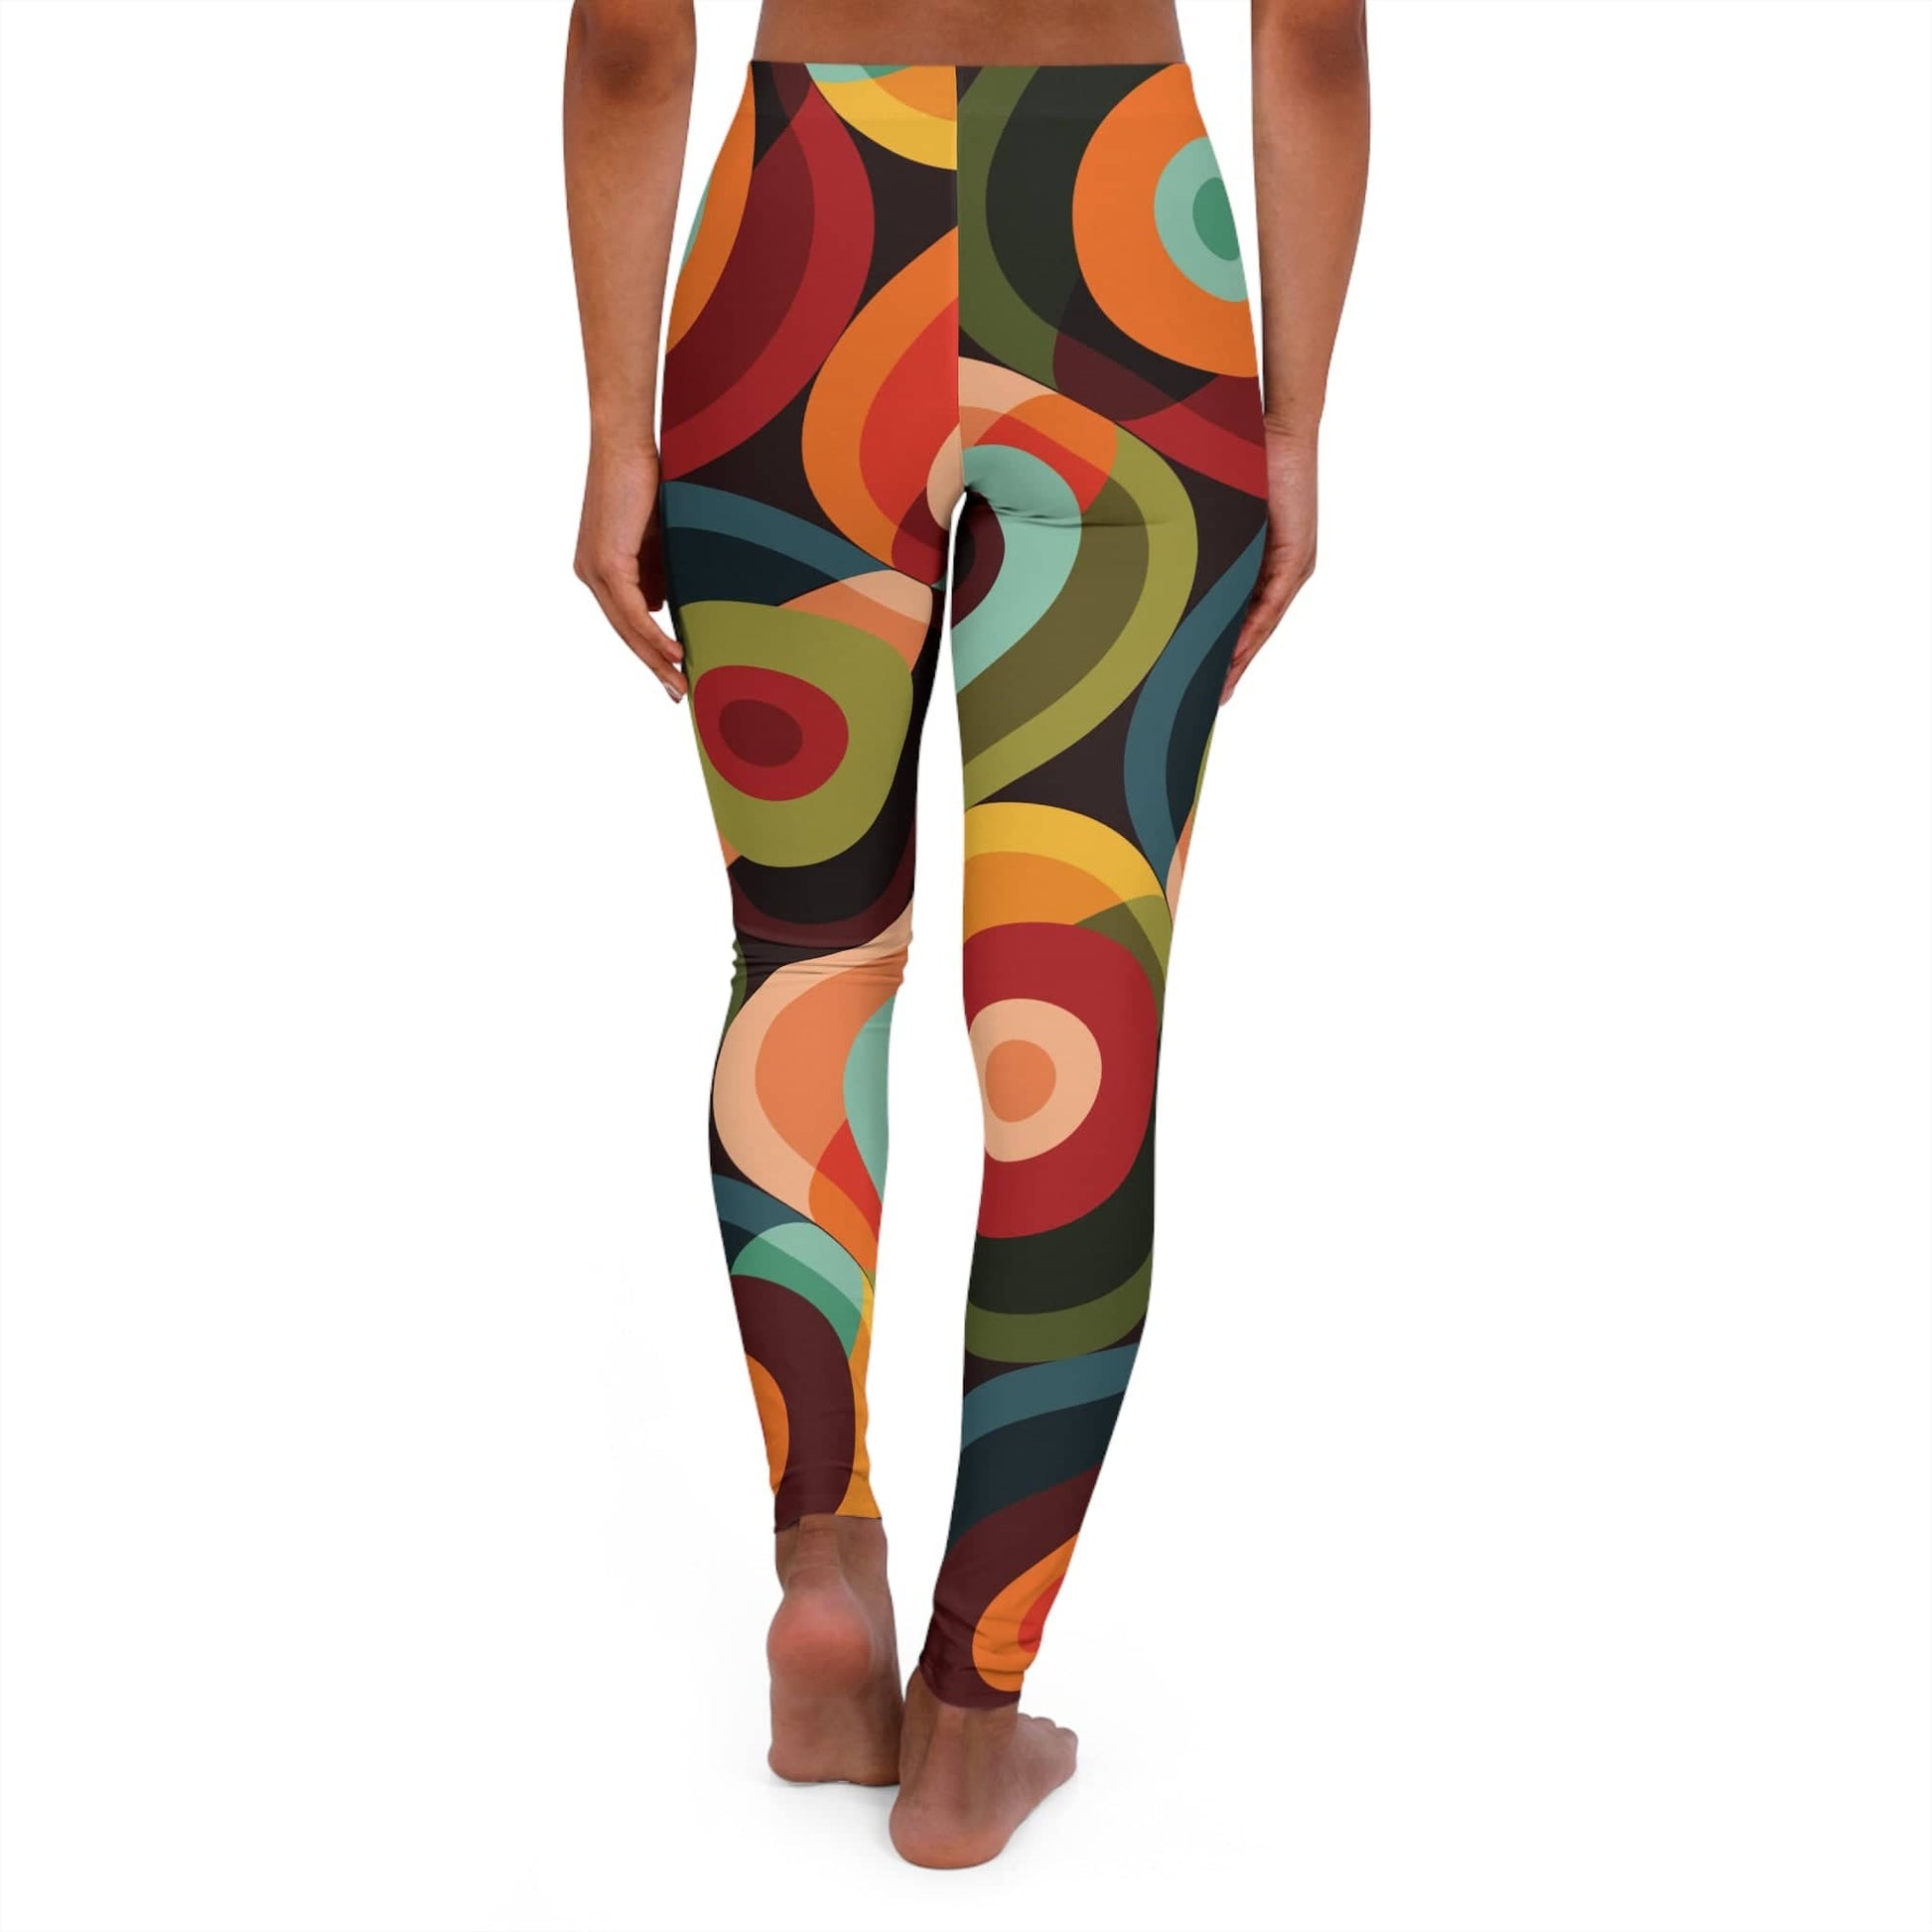 Kate McEnroe New York 70s Groovy Hippie Psychedelic Orbs Leggings, Mid Century Modern Retro Abstract Casual Yoga Pants, Geometric Circles Workout Pants, Leggings